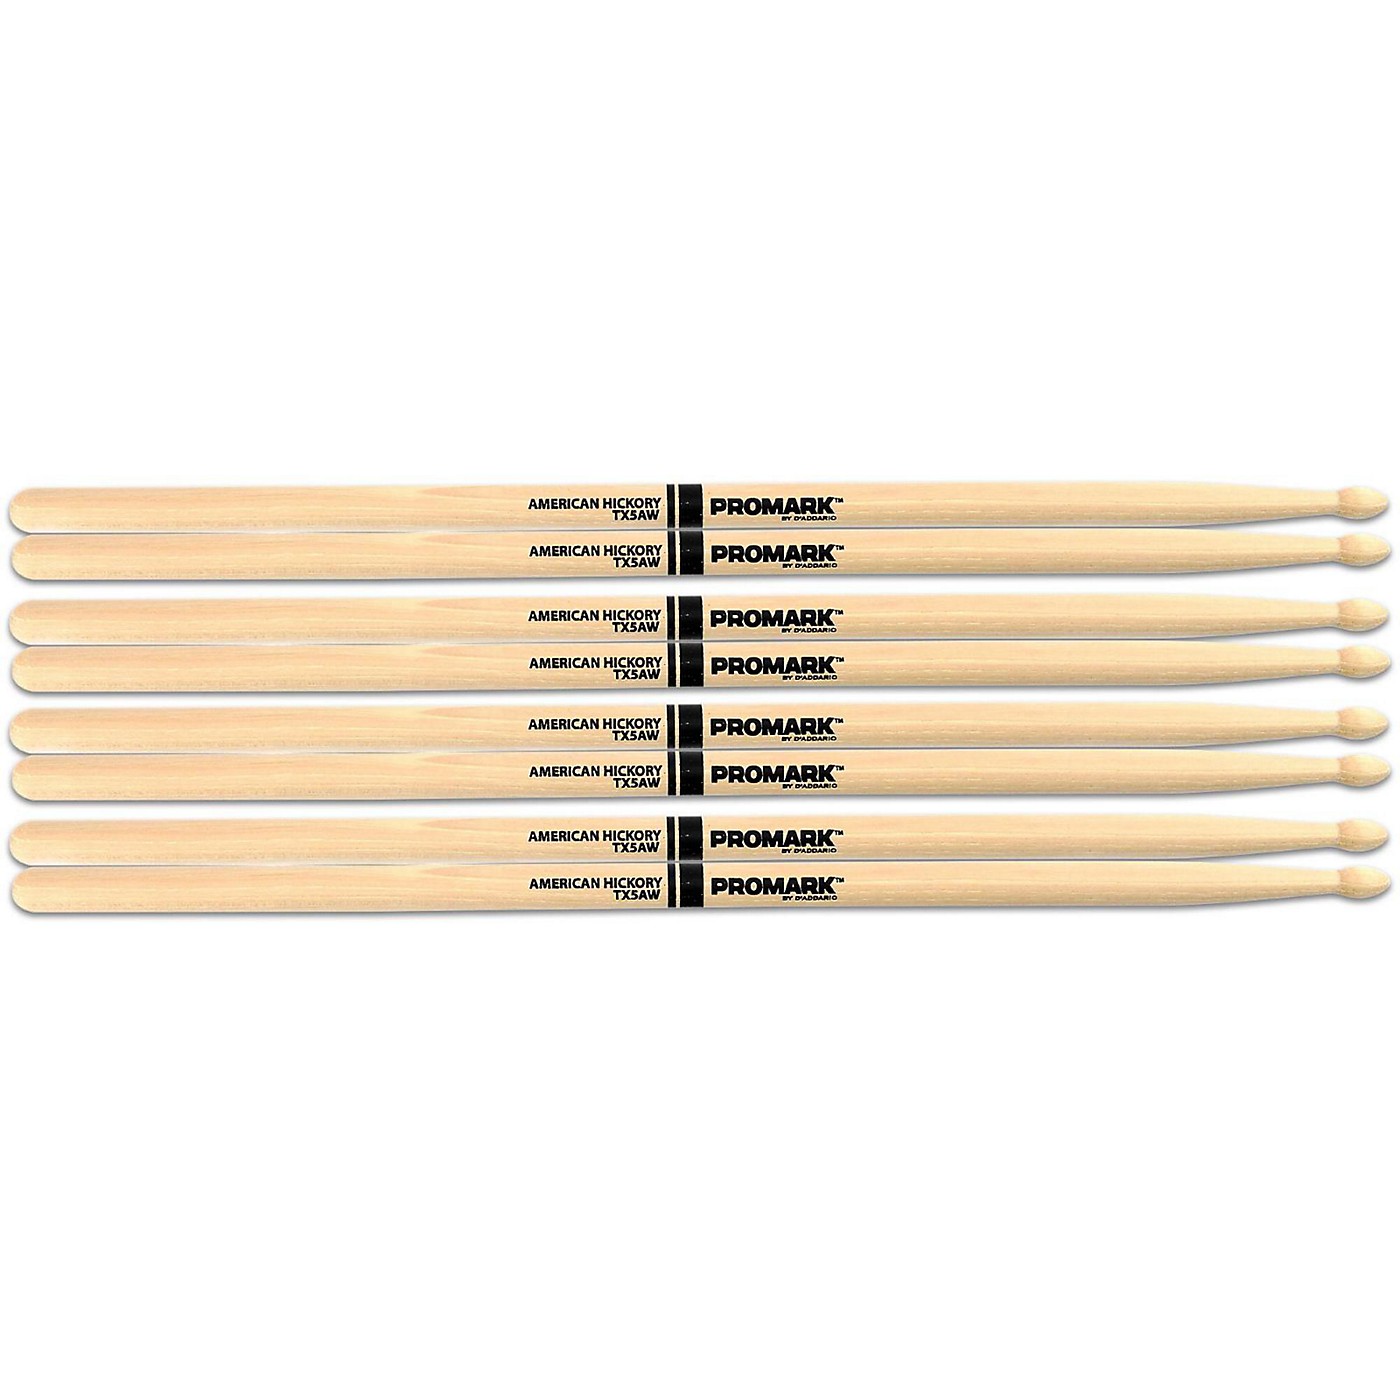 PROMARK Buy 3 Pair of Classic Forward Hickory Drum Sticks, Get One Free thumbnail